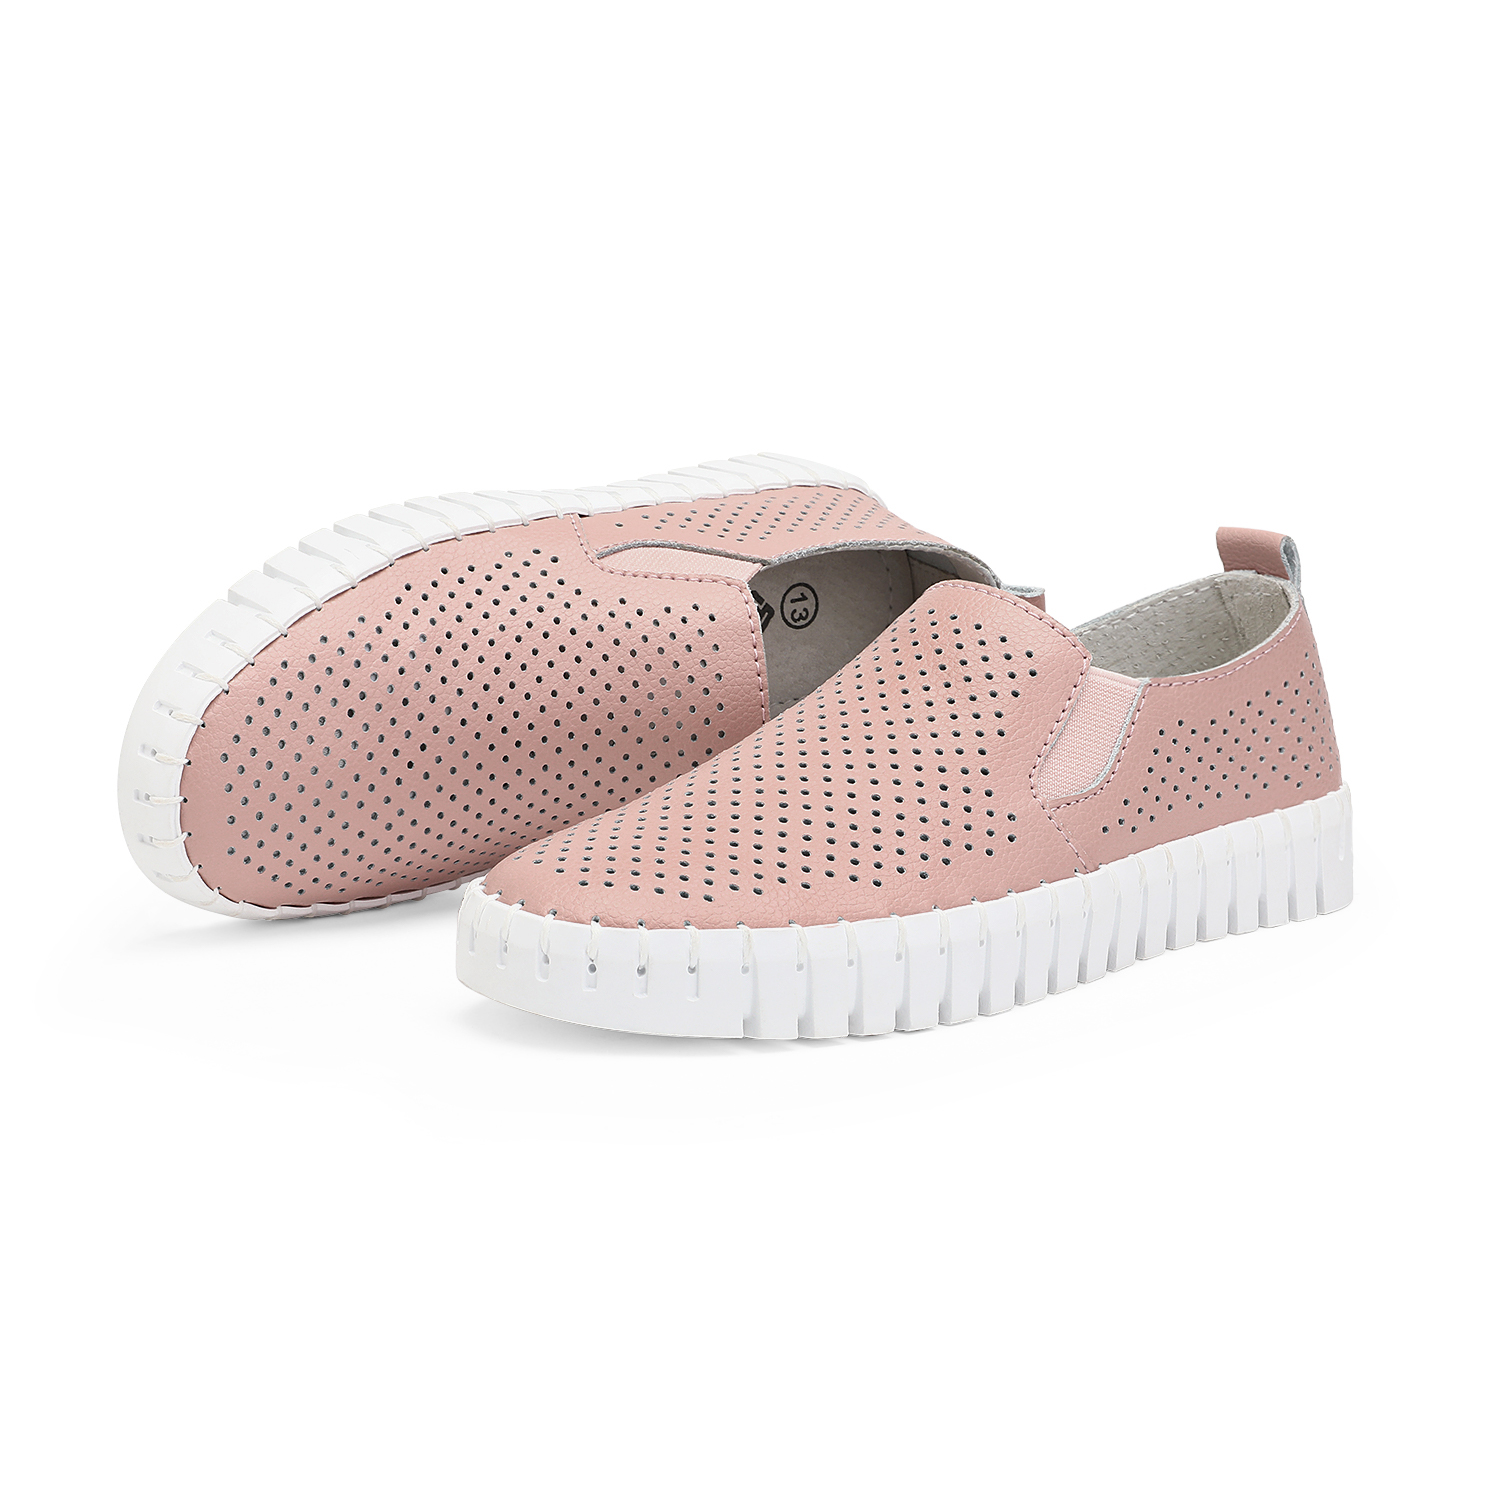 Dream Pairs Kids Slip-On Shoes Comfort Breath Flats Loafers Boys Girls Outdoor Casual Shoes ESSA-K PINK Size 11 - image 3 of 5